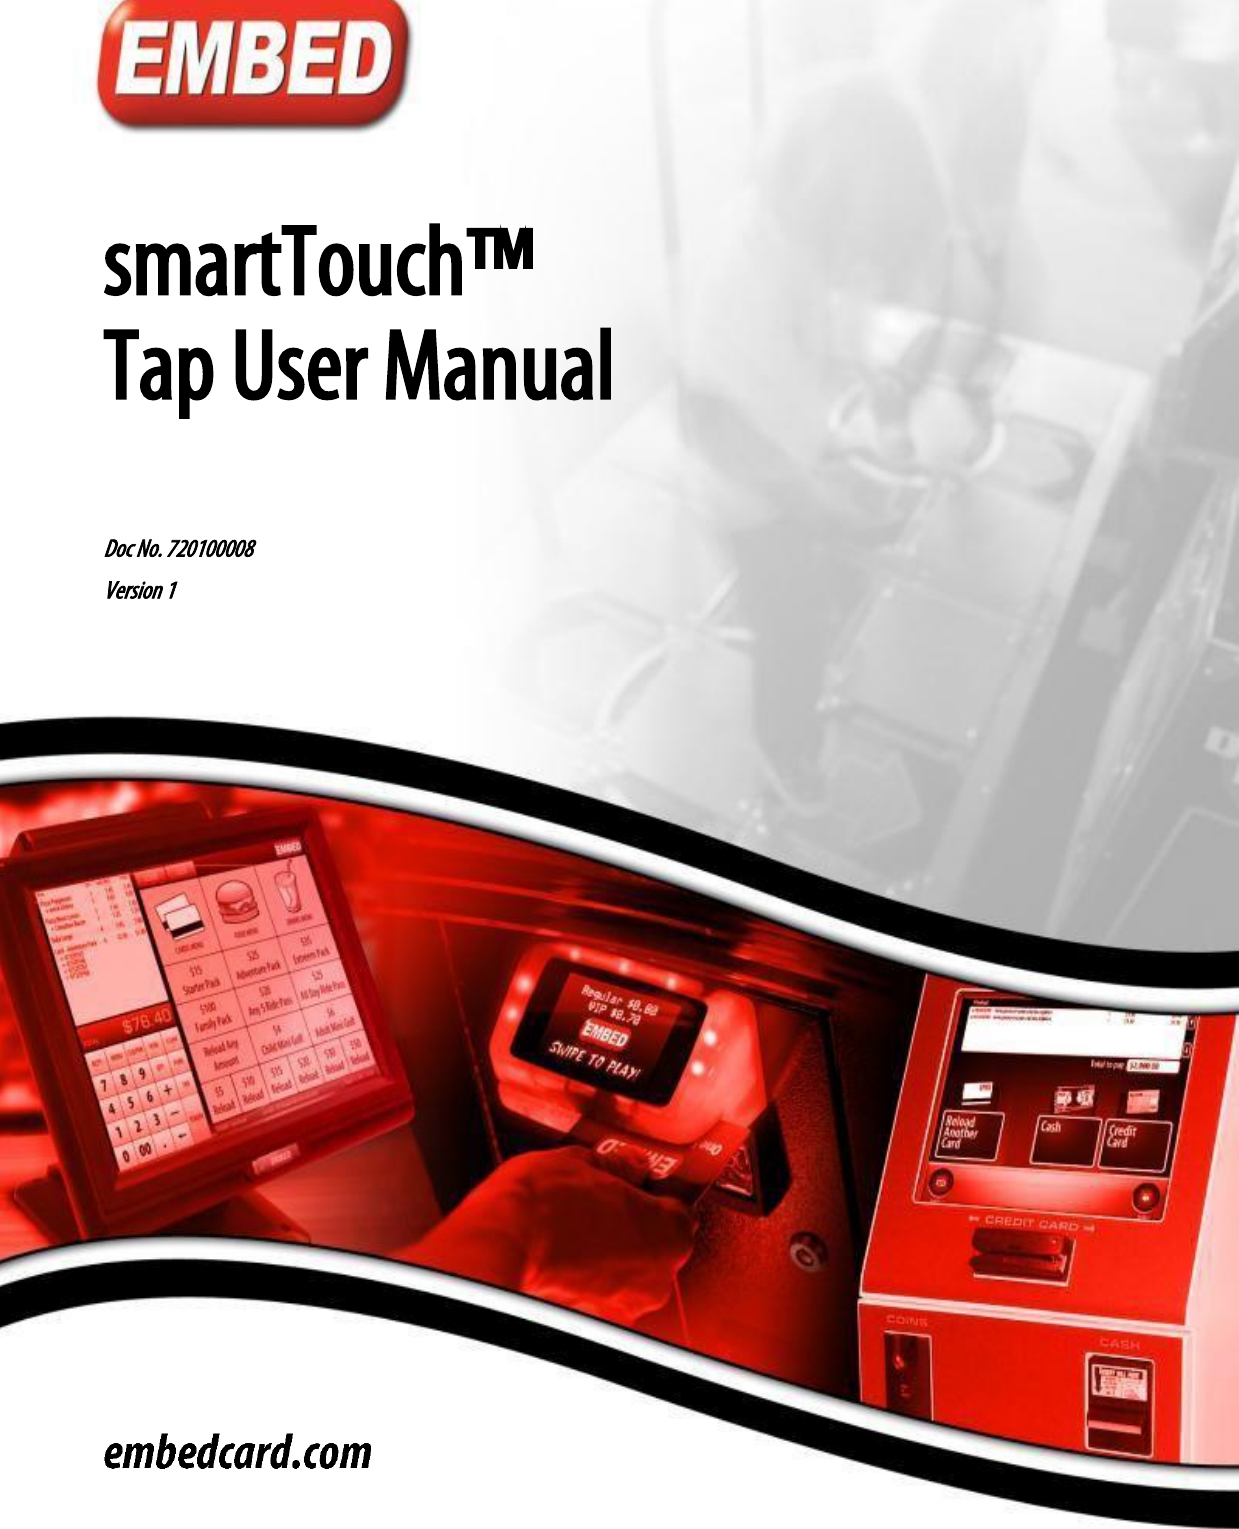               smartTouch™ Tap User Manual   Doc No. 720100008 Version 1  